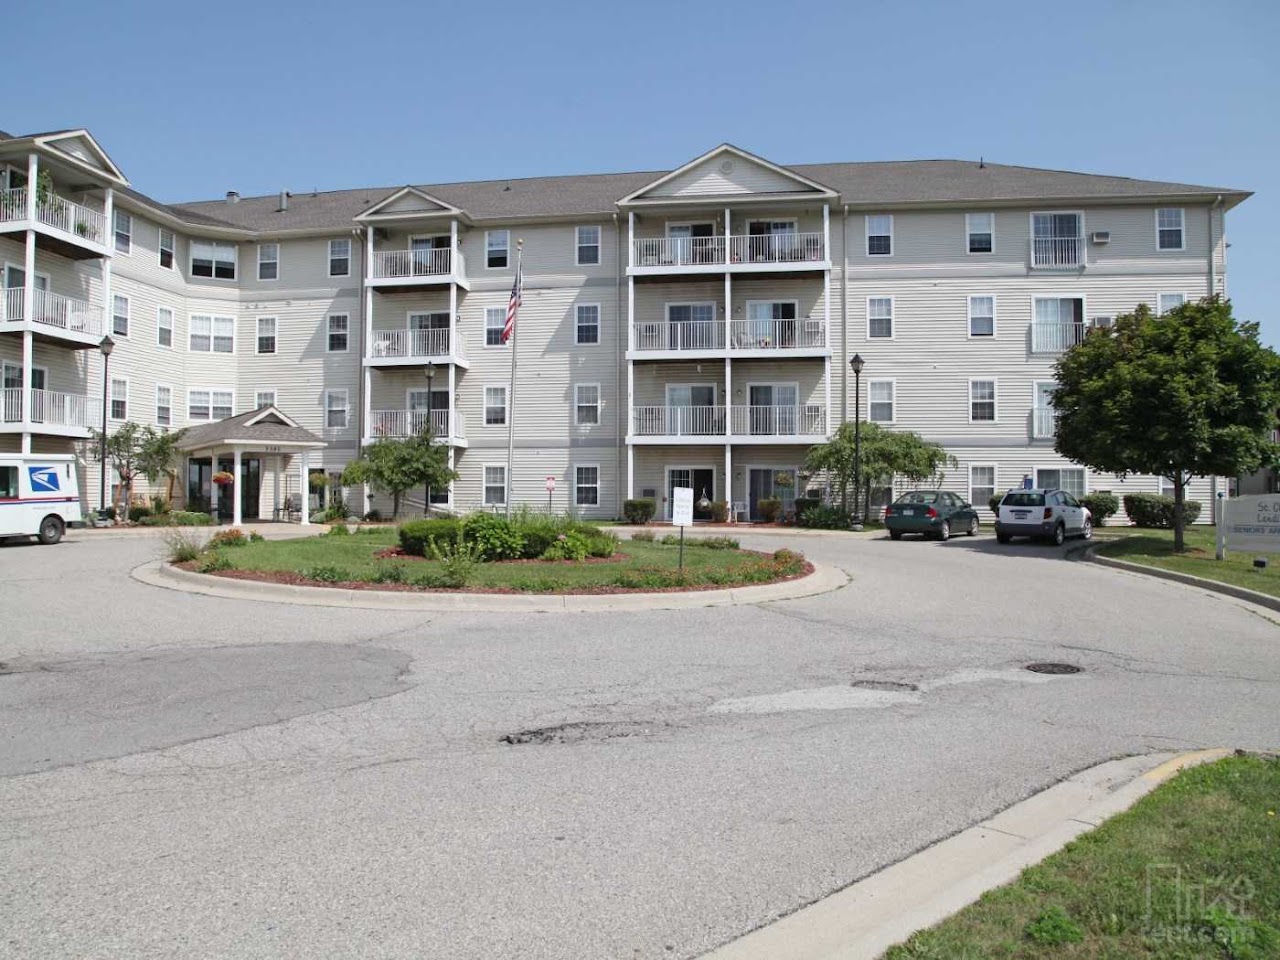 Photo of ST CLAIR LANDINGS. Affordable housing located at 3345 MILITARY ST PORT HURON, MI 48060